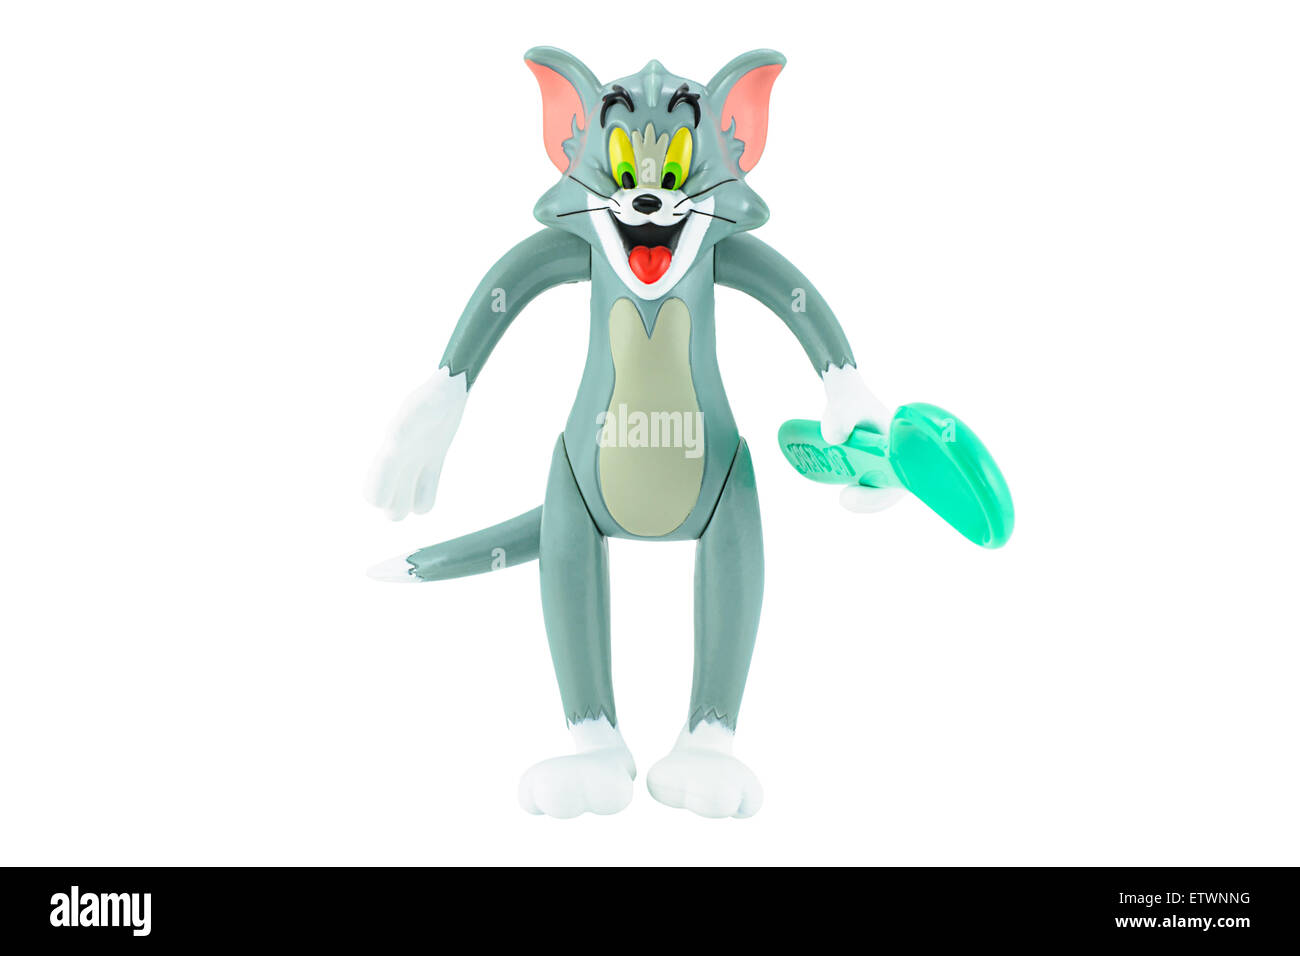 Bangkok,Thailand - February 17, 2015: Tom gray cat with spoon in hand toy character form Tom and Jerry animation cartoon. Stock Photo